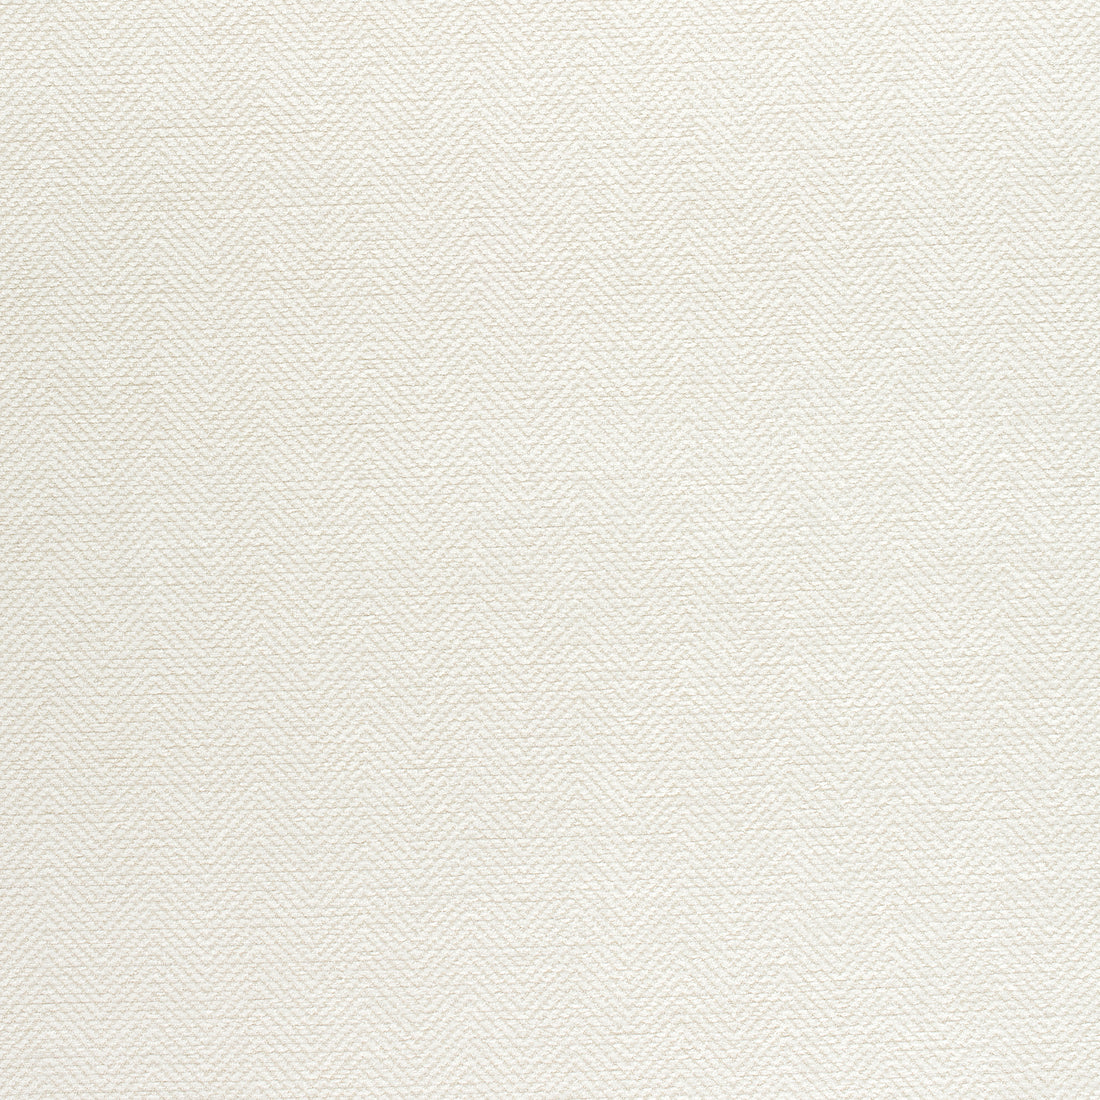 Bronwyn Herringbone fabric in almond color - pattern number W80681 - by Thibaut in the Pinnacle collection